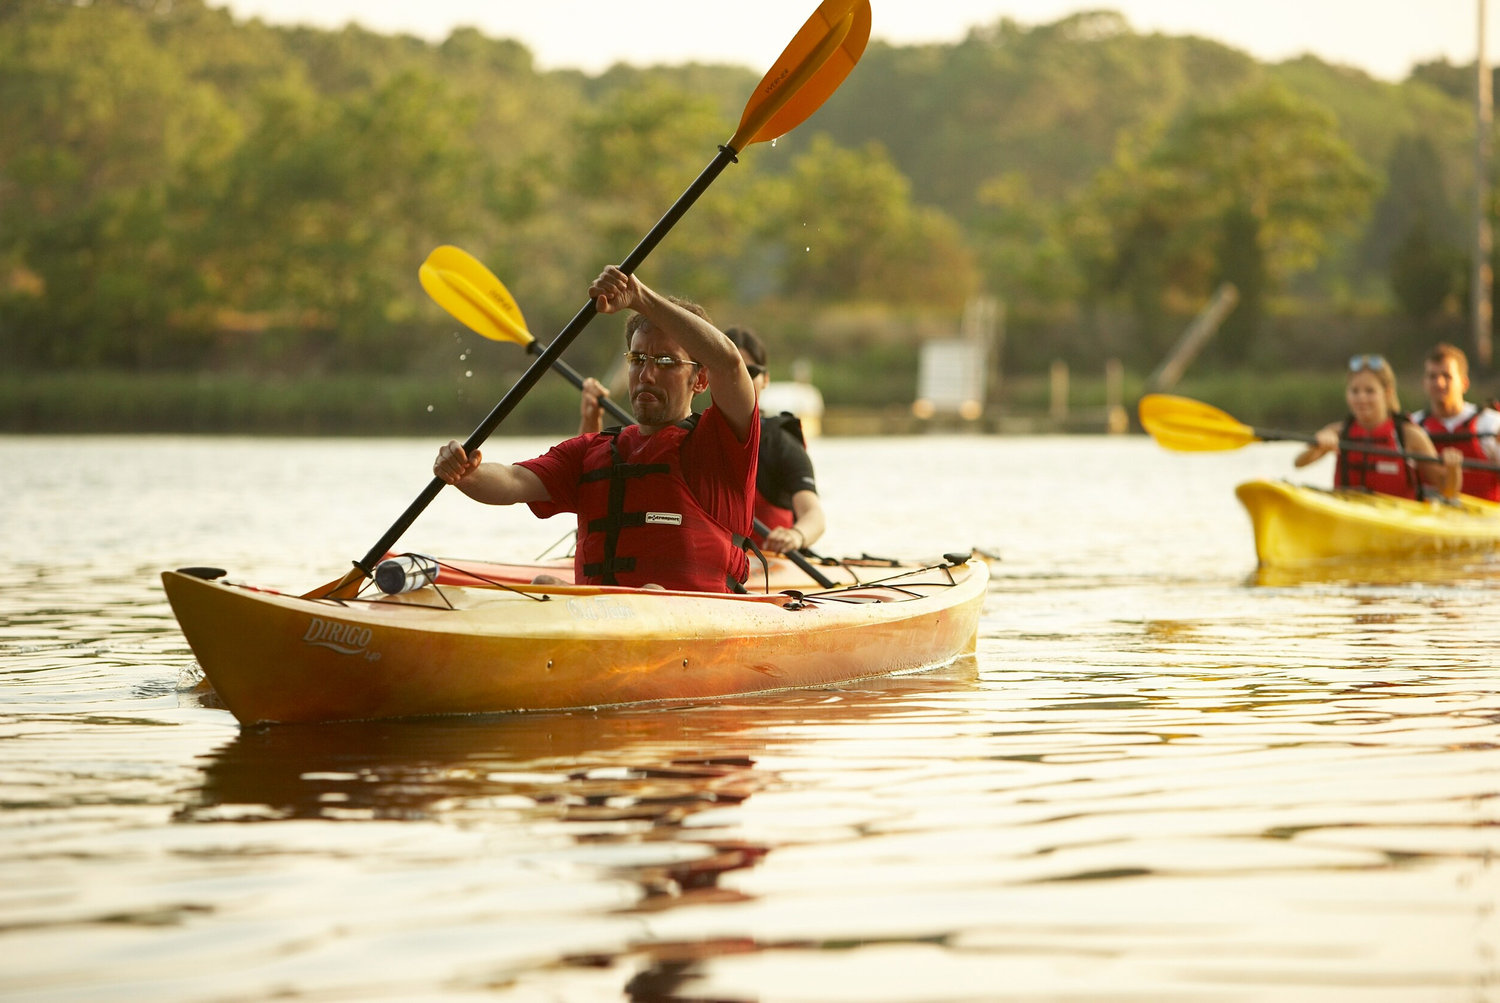 Learn the ropes and get all the water gear you need from The Kayak Centre